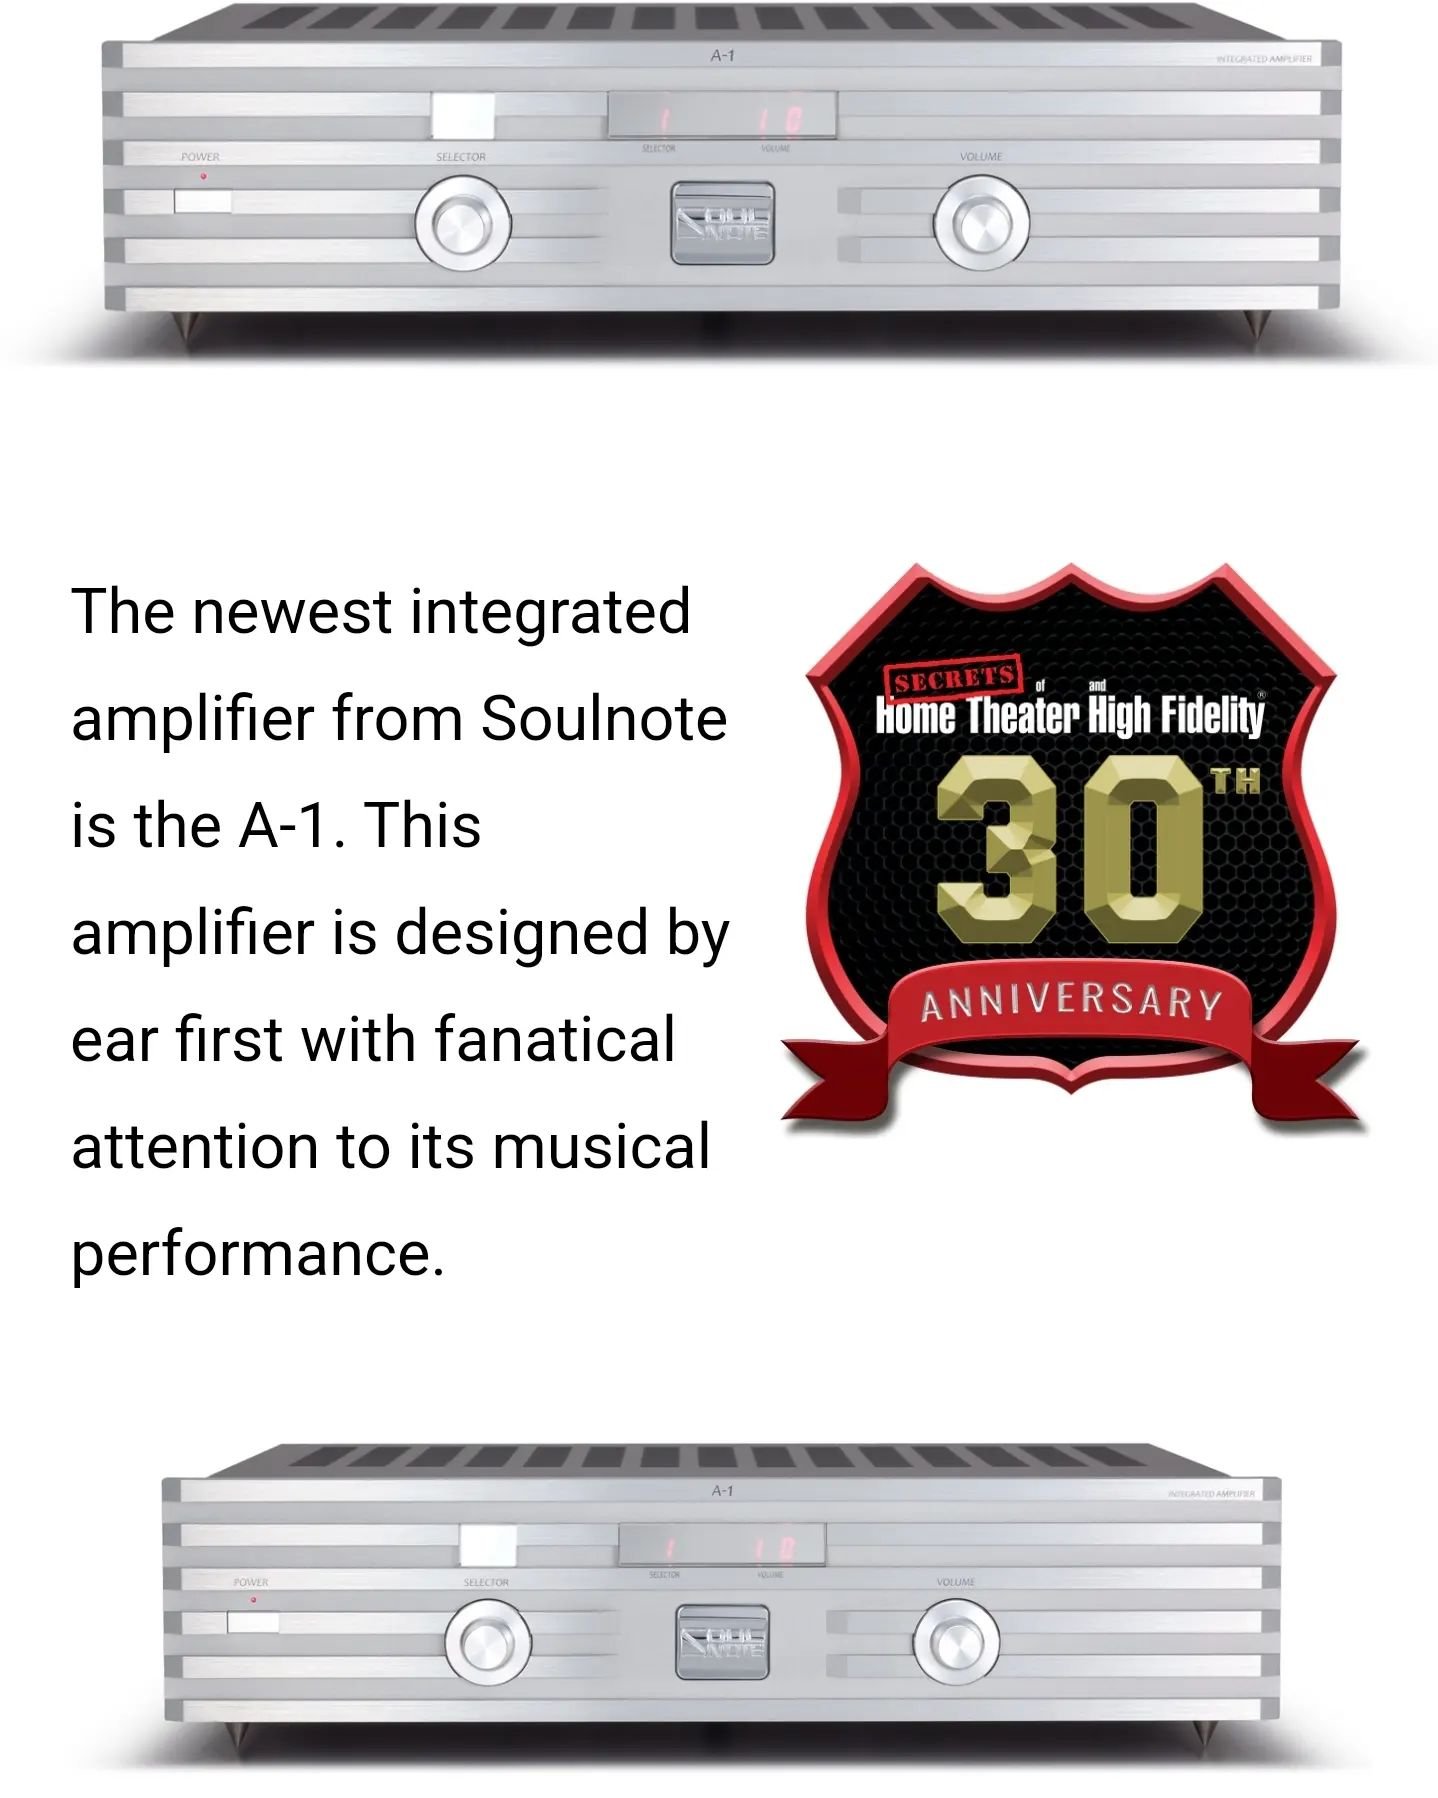 HomeTheatreHiFi.com has a fantastic review of the Soulnote A1. Entry level for Soulnote it may be, but performance wise this is top tier amplification. Review highlights:

&bull;Surprising performance from a small, light form factor.
&bull;Simple to 